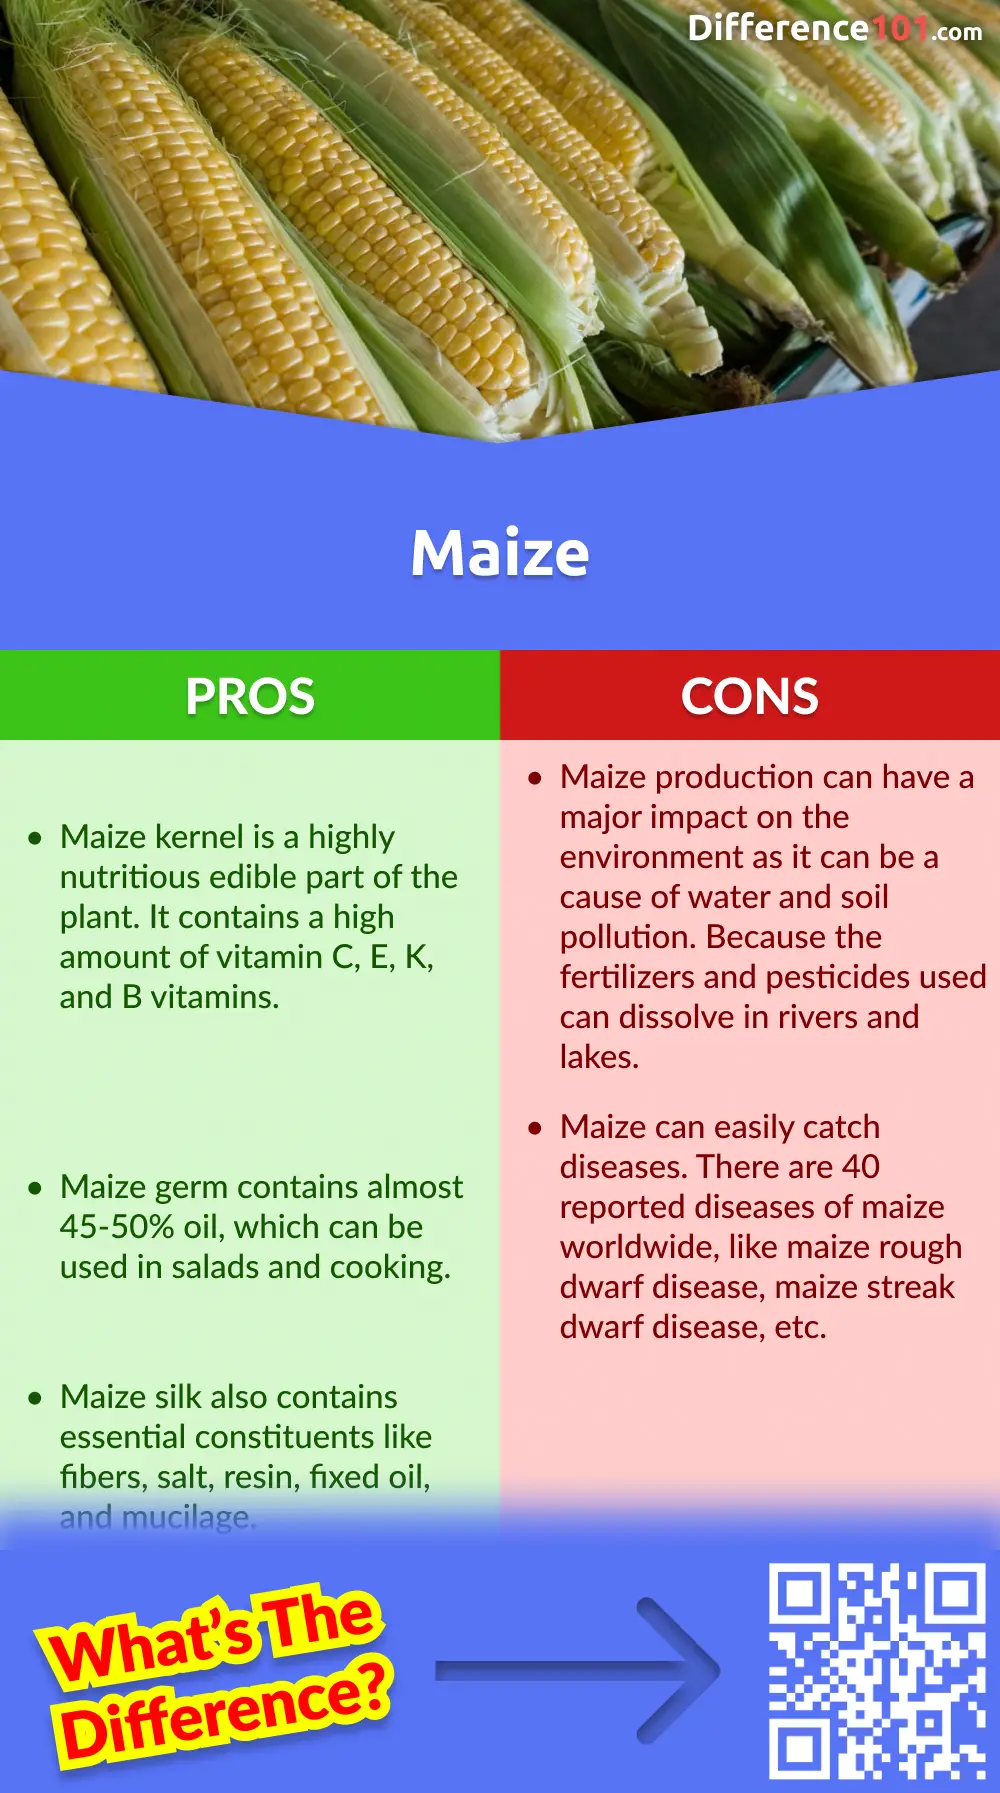 Maize Pros and Cons